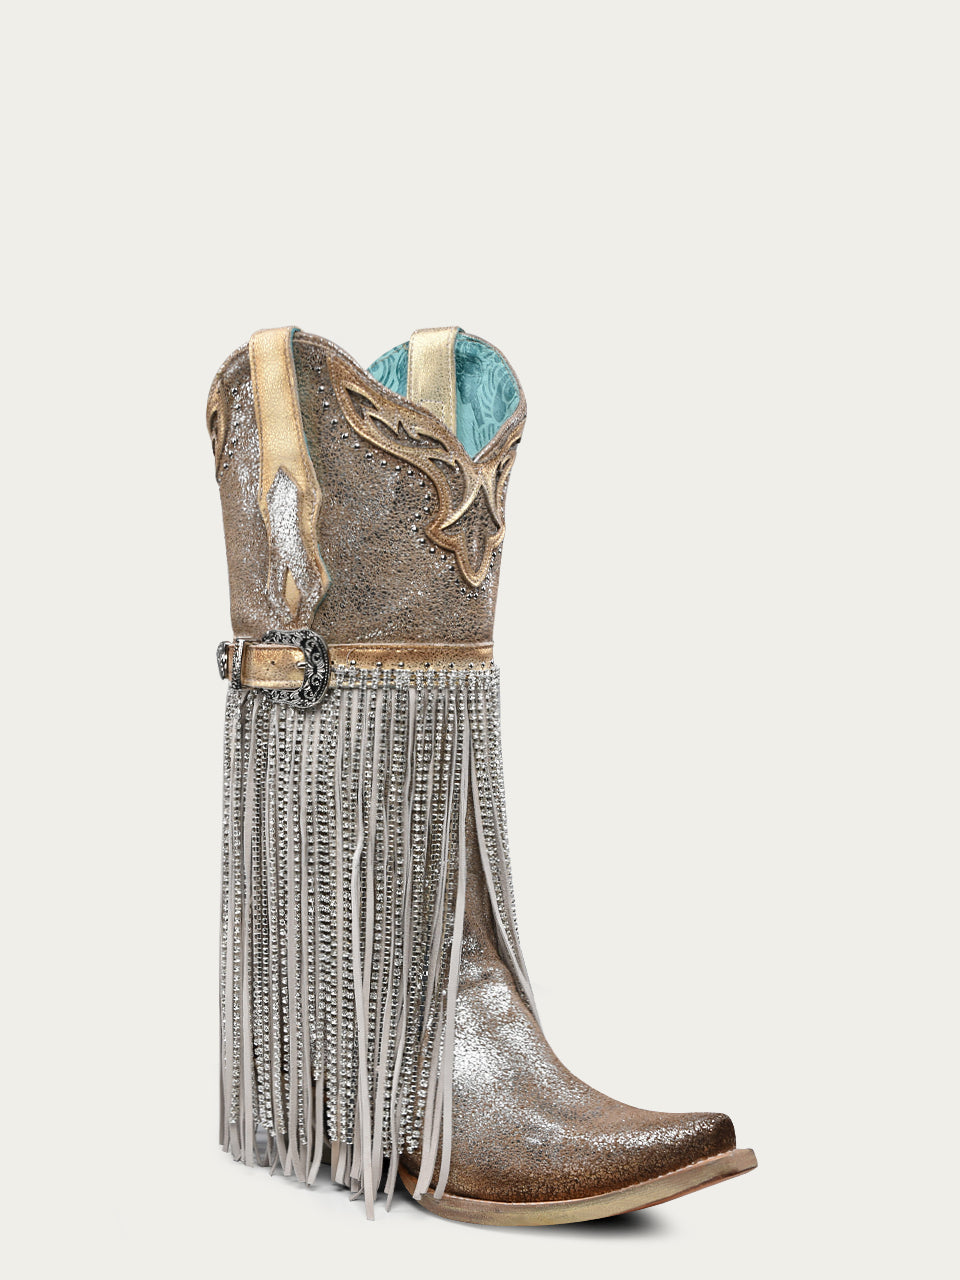 A4514 - WOMEN'S SILVER-GOLD FINISH WITH CRYSTAL FRINGE, HARNESS AND STUDS SNIP TOE COWBOY BOOT